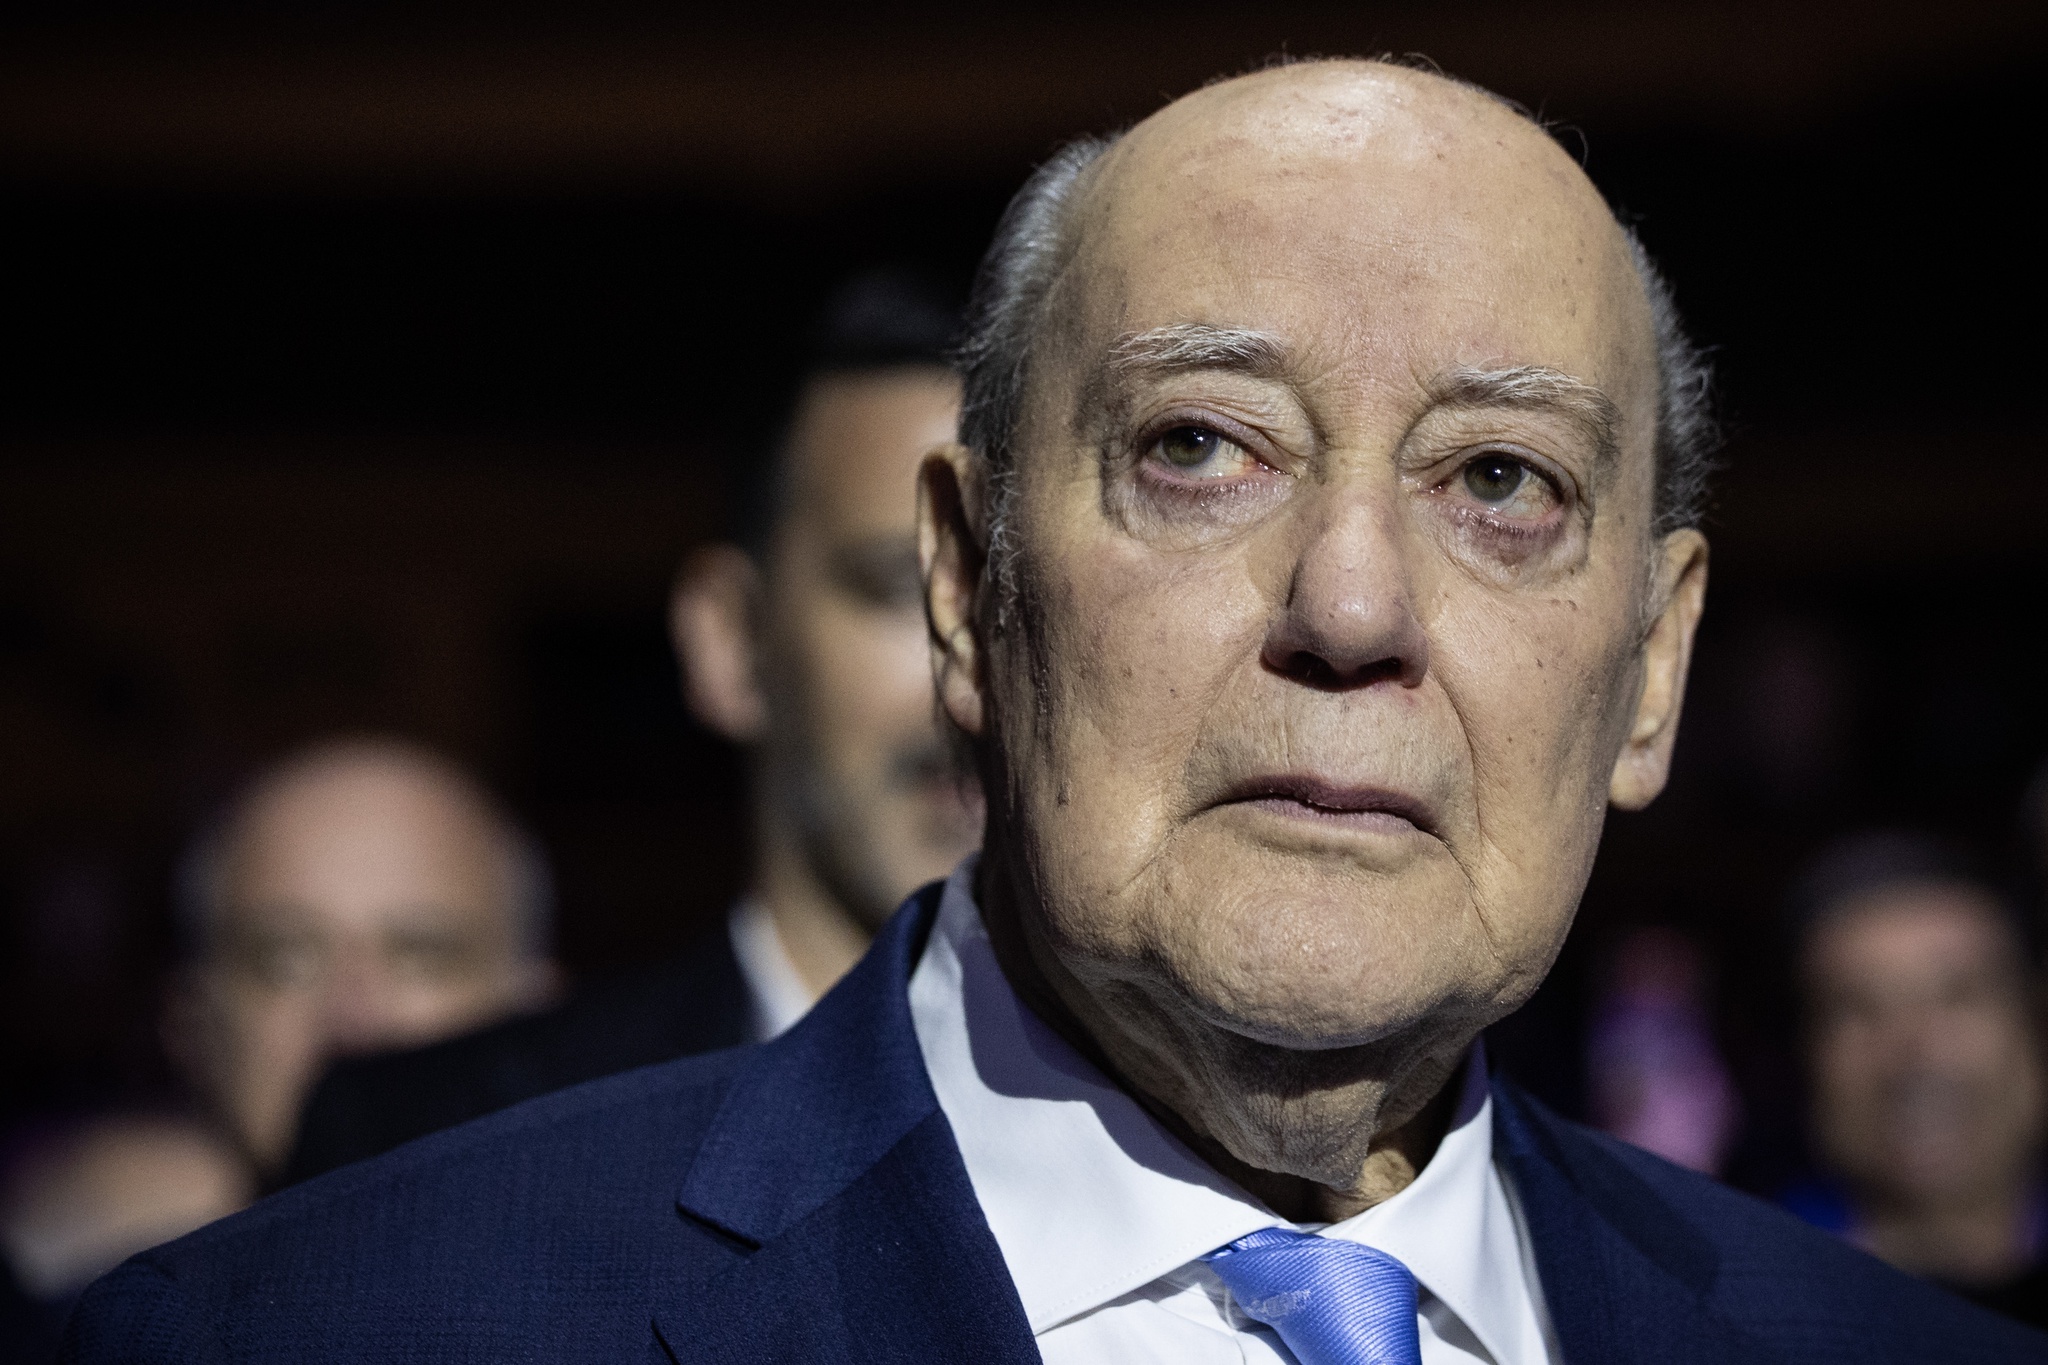 TVI General Director Jokes about FC Porto’s Assembly – Reaction from Pinto da Costa and Others